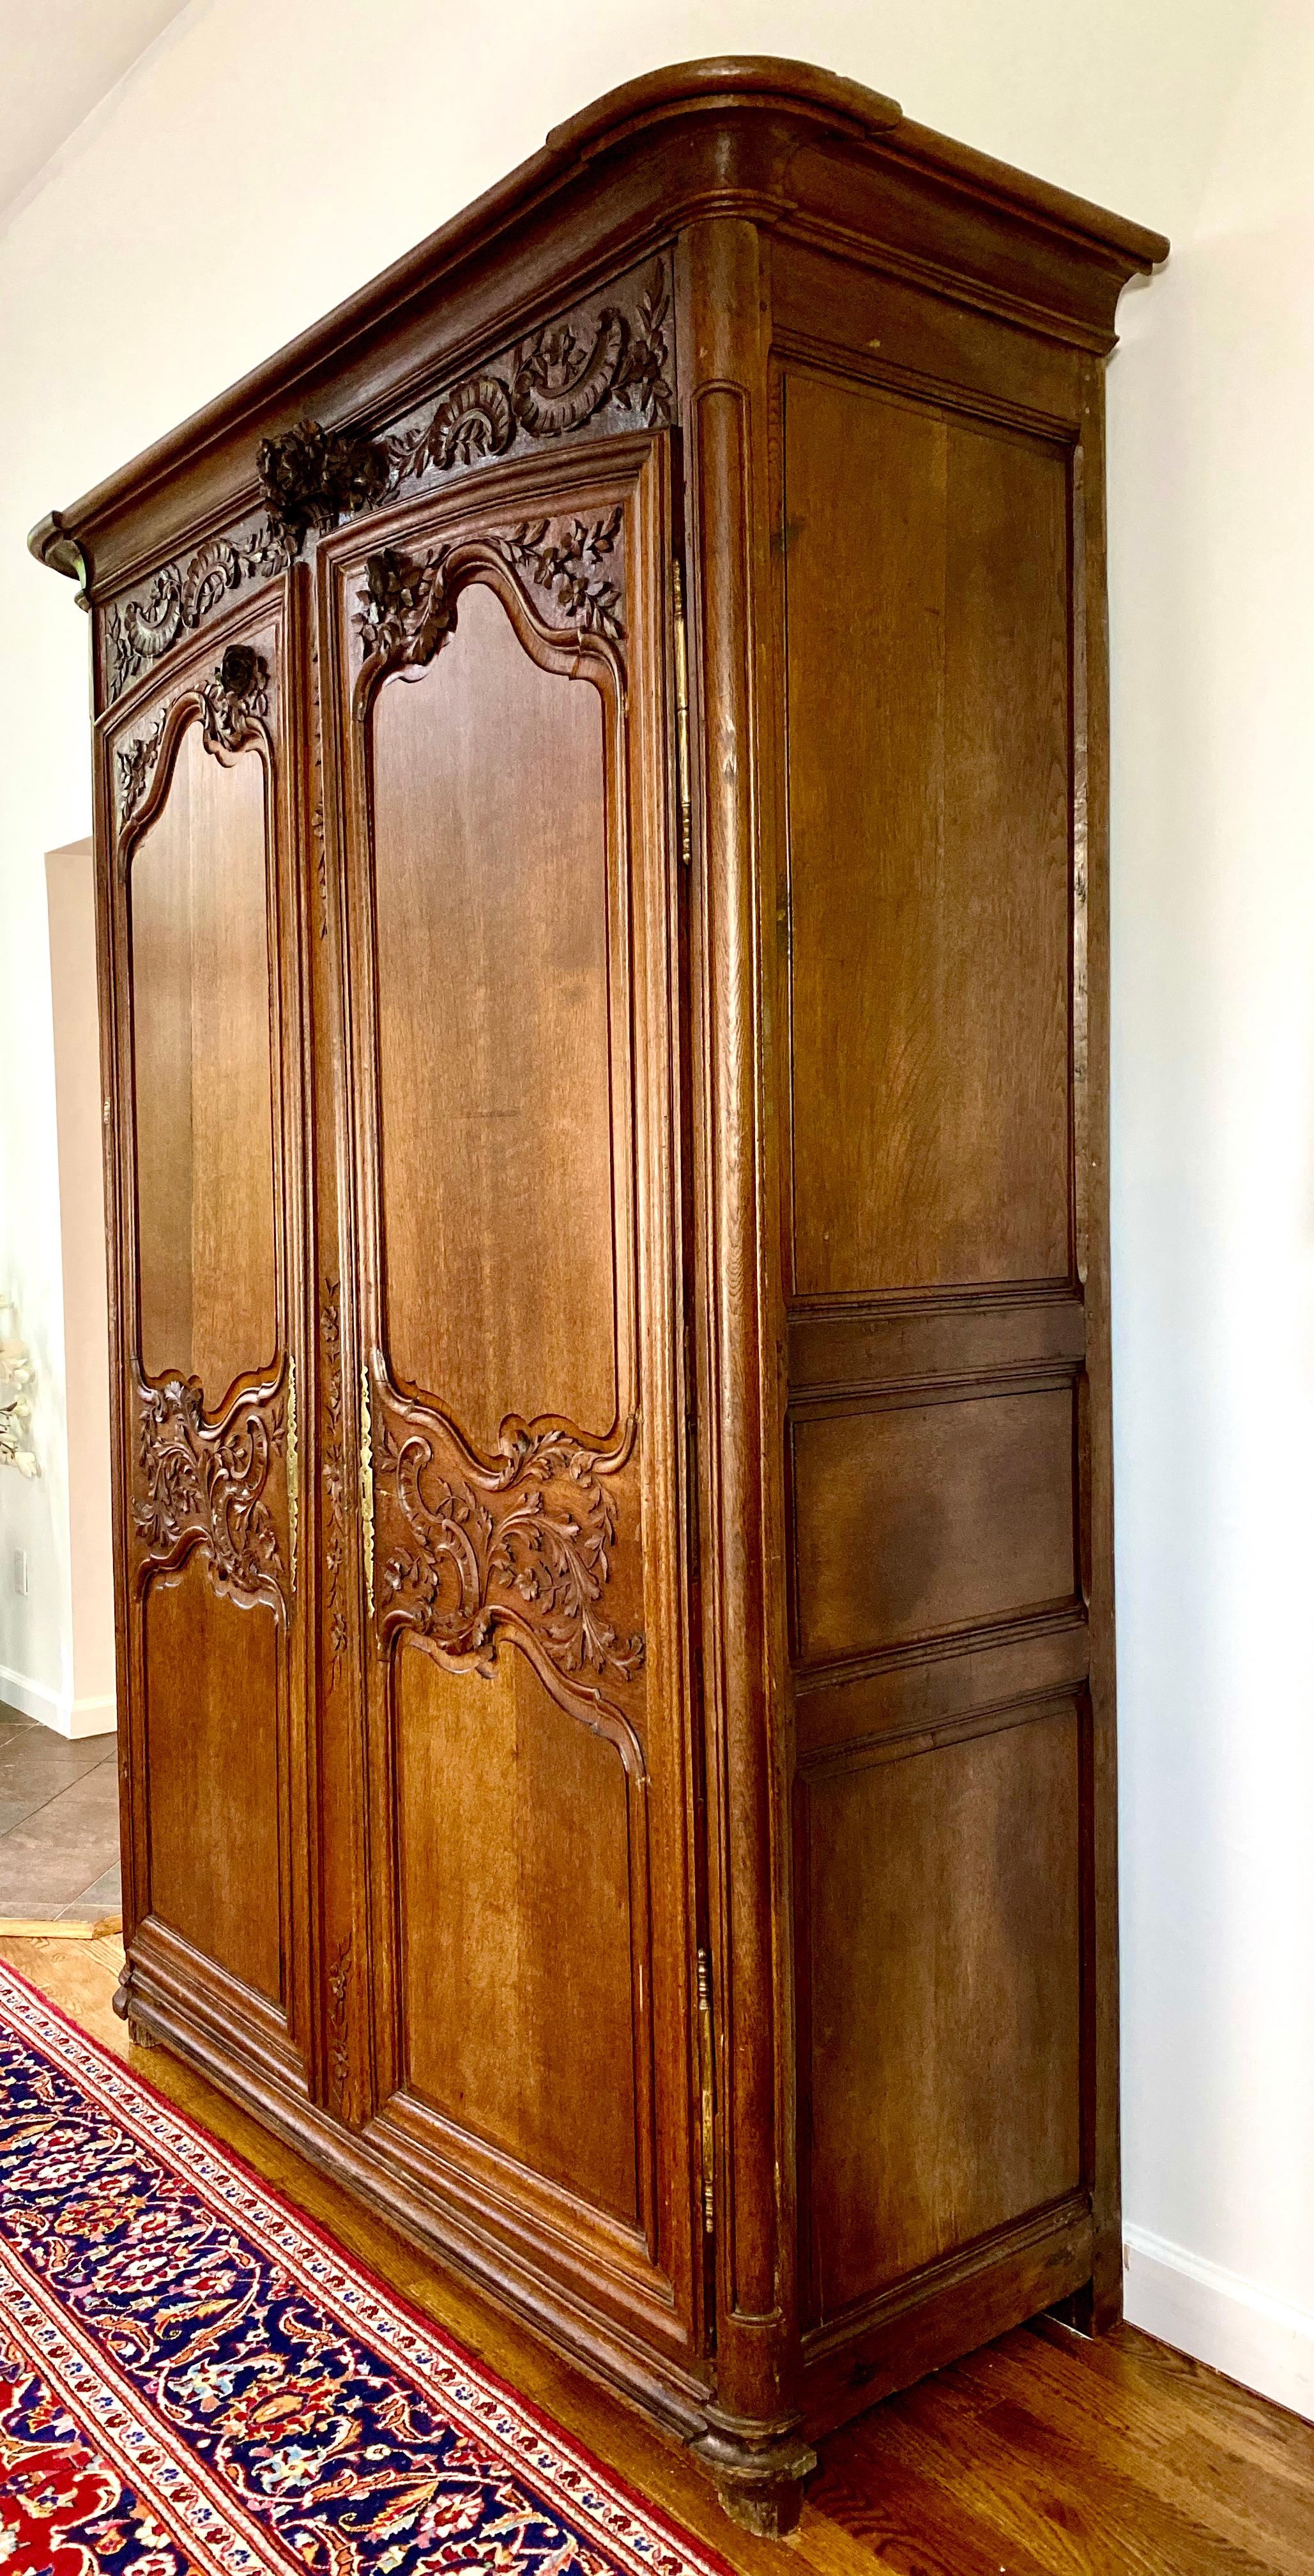 The French custom of a father's gift to his newborn daughter was the crafting or purchase of an armoire carved with symbols of plenty and happiness, which stored her trousseau to use in her own home once she married. This beautifully hand carved,